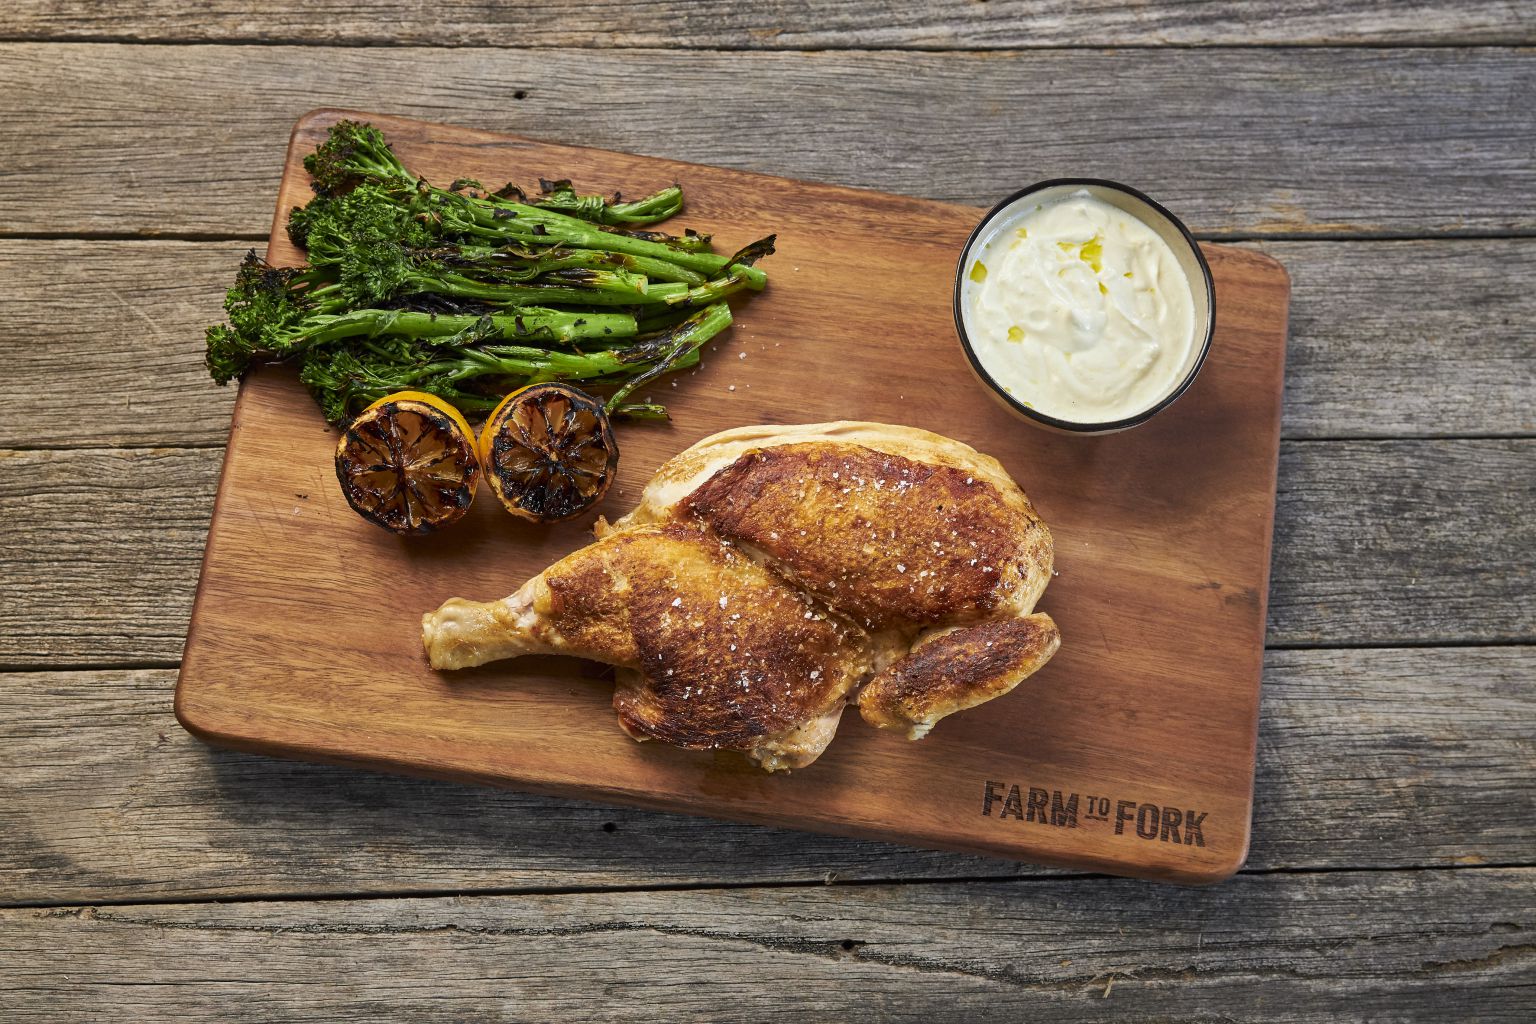 Brick Chicken with Grilled Broccolini - Farm to Fork